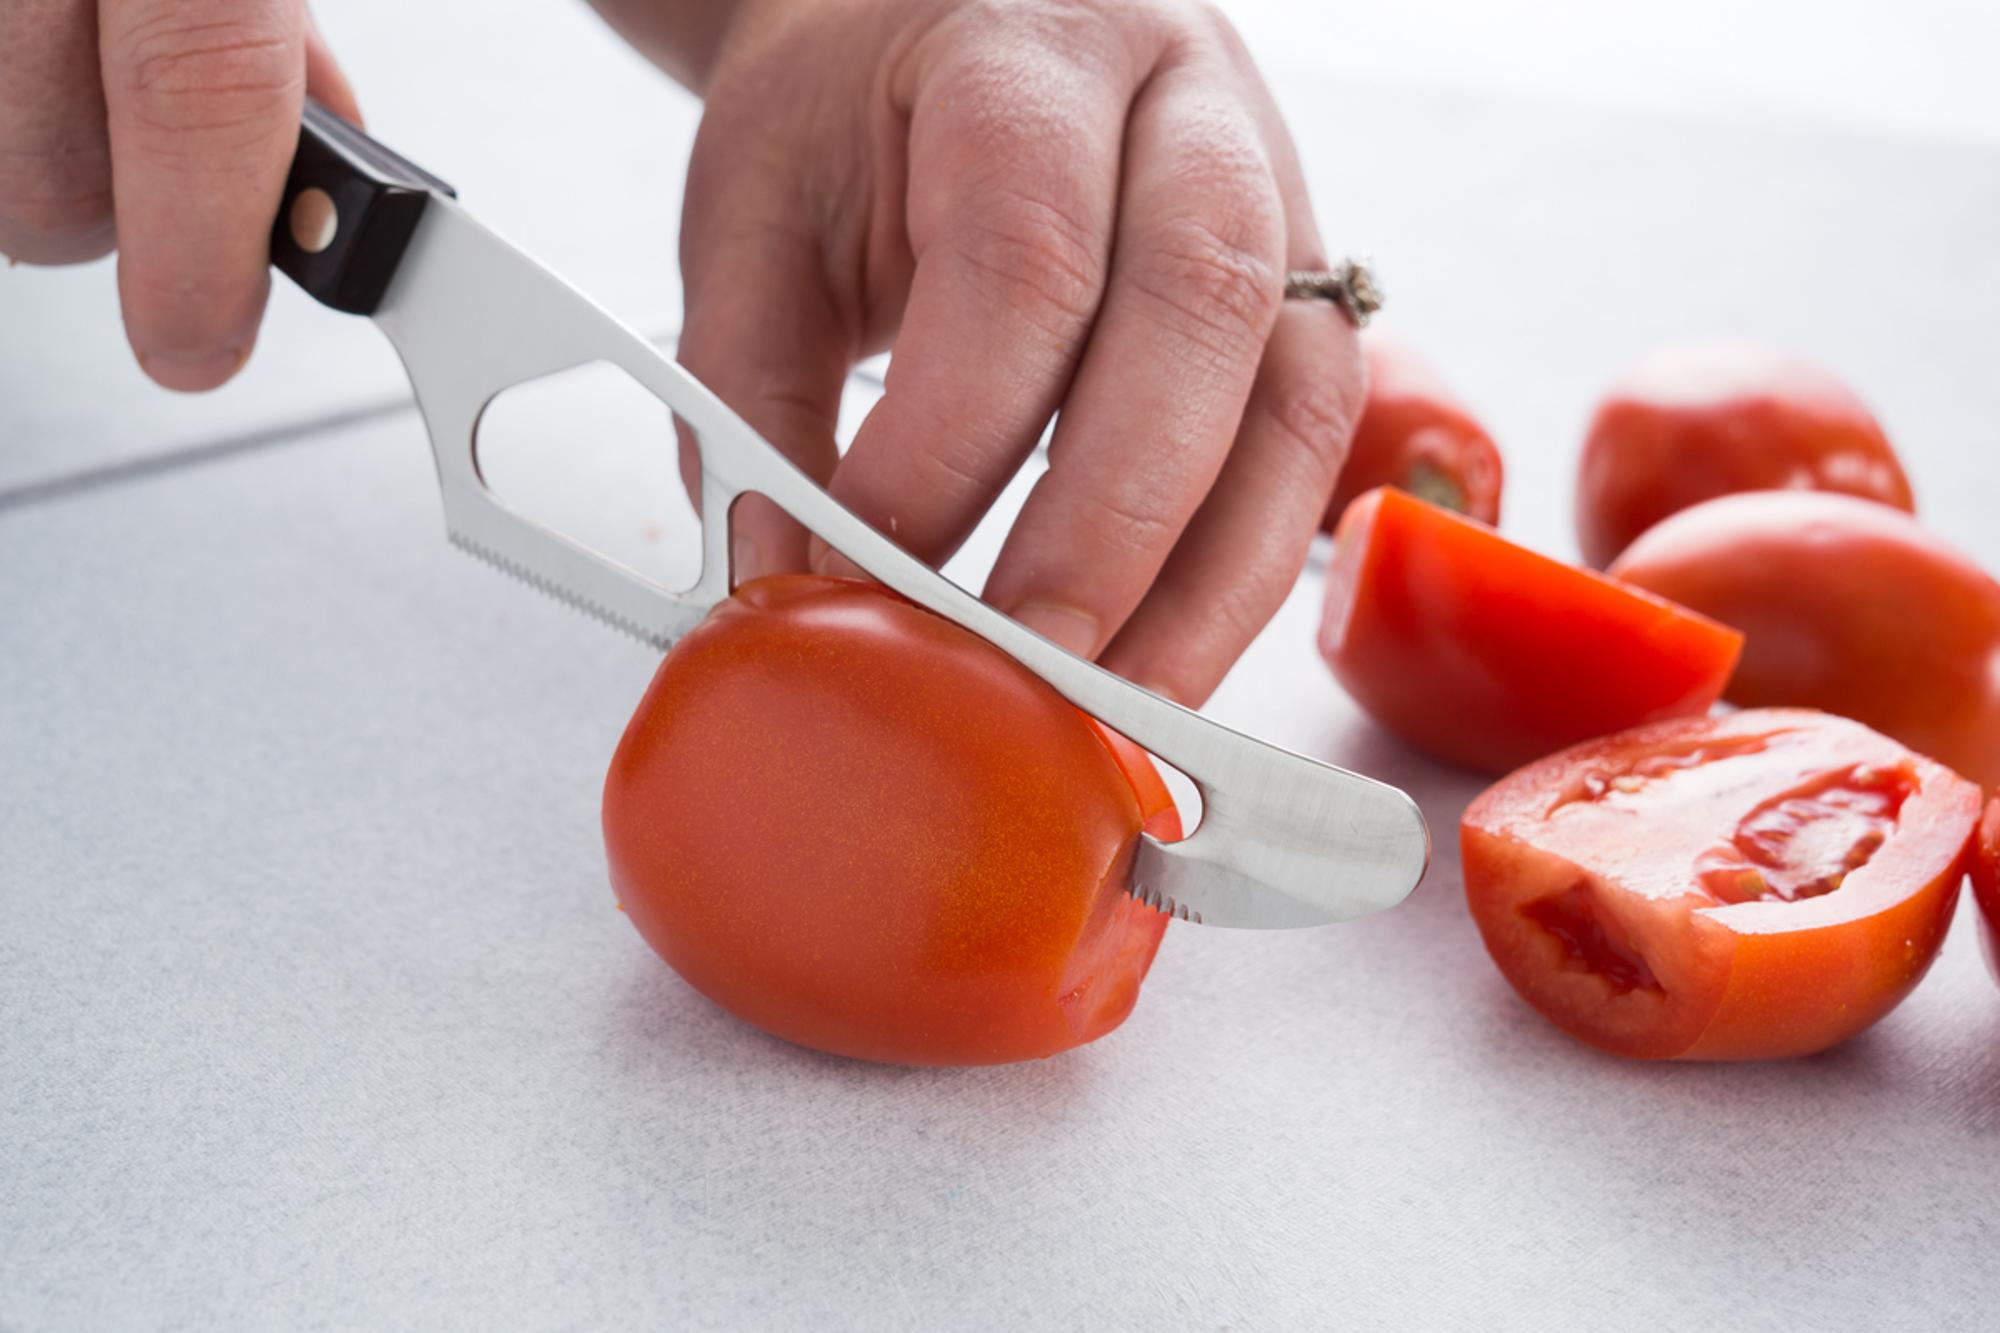 Cutting tomatoes into wedges with a Traditional Cheese Knife.